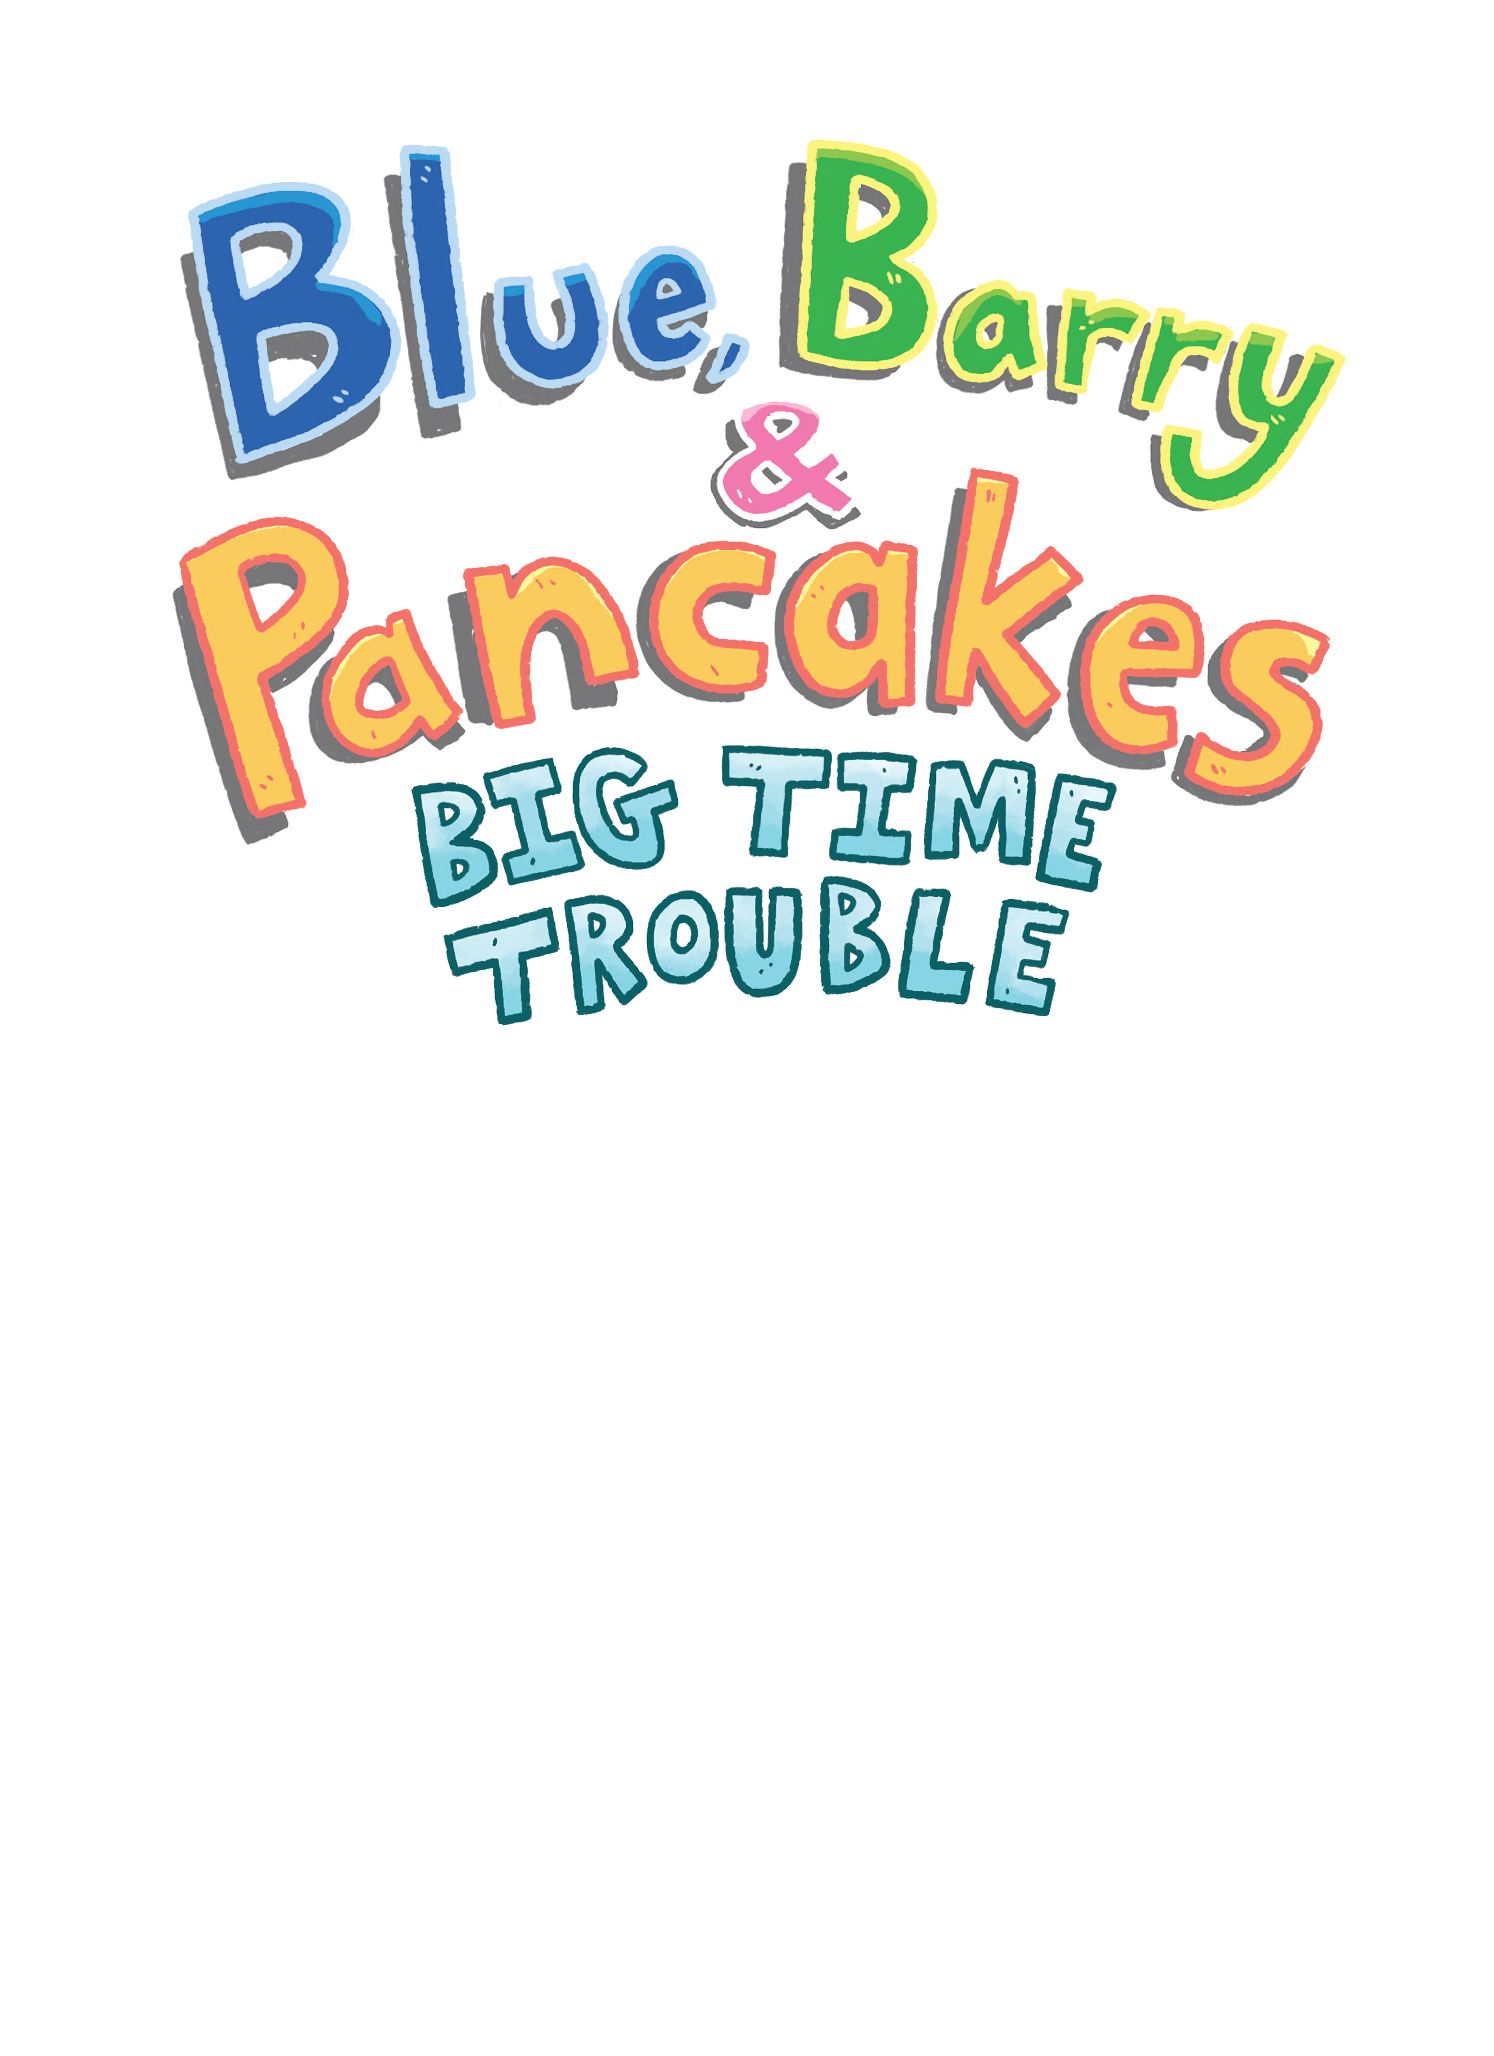 Read online Blue, Barry & Pancakes comic -  Issue # TPB 5 - 3